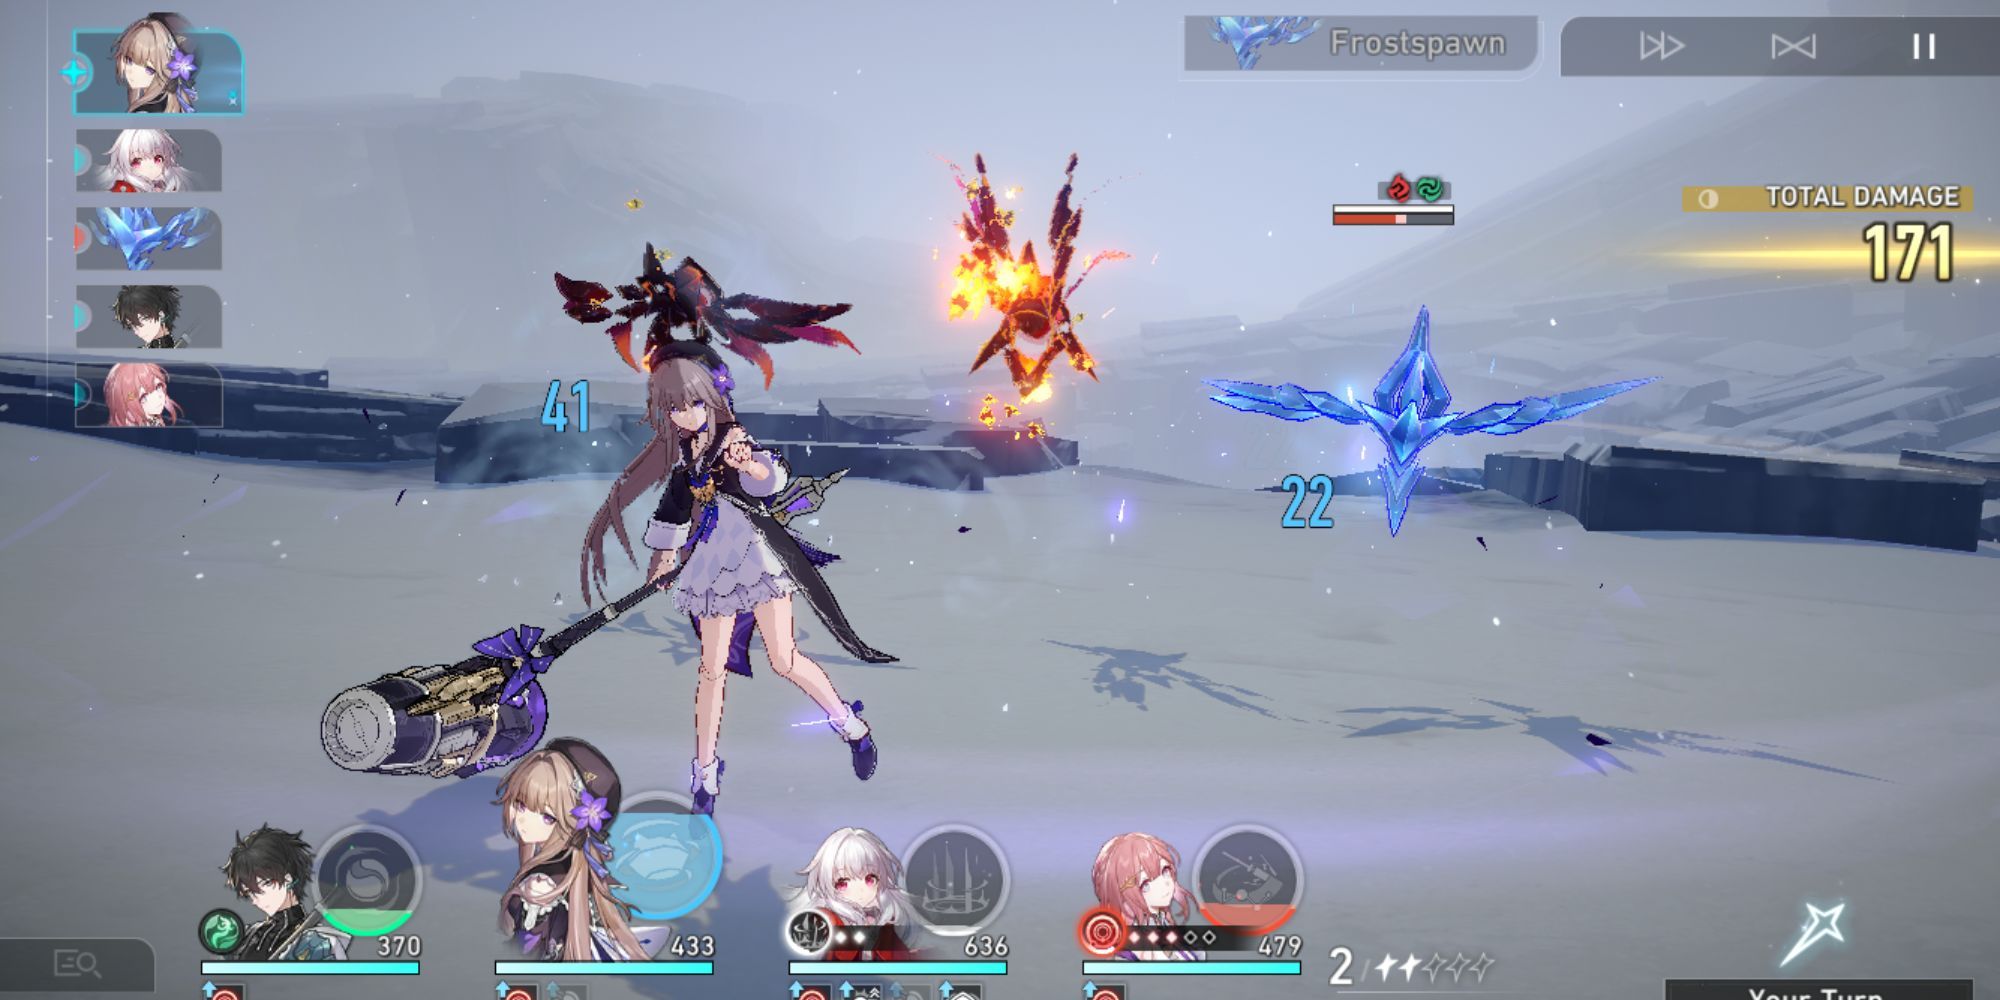 Honkai: Star Rail - Herta uses her talent to perform a follow-up attack during combat